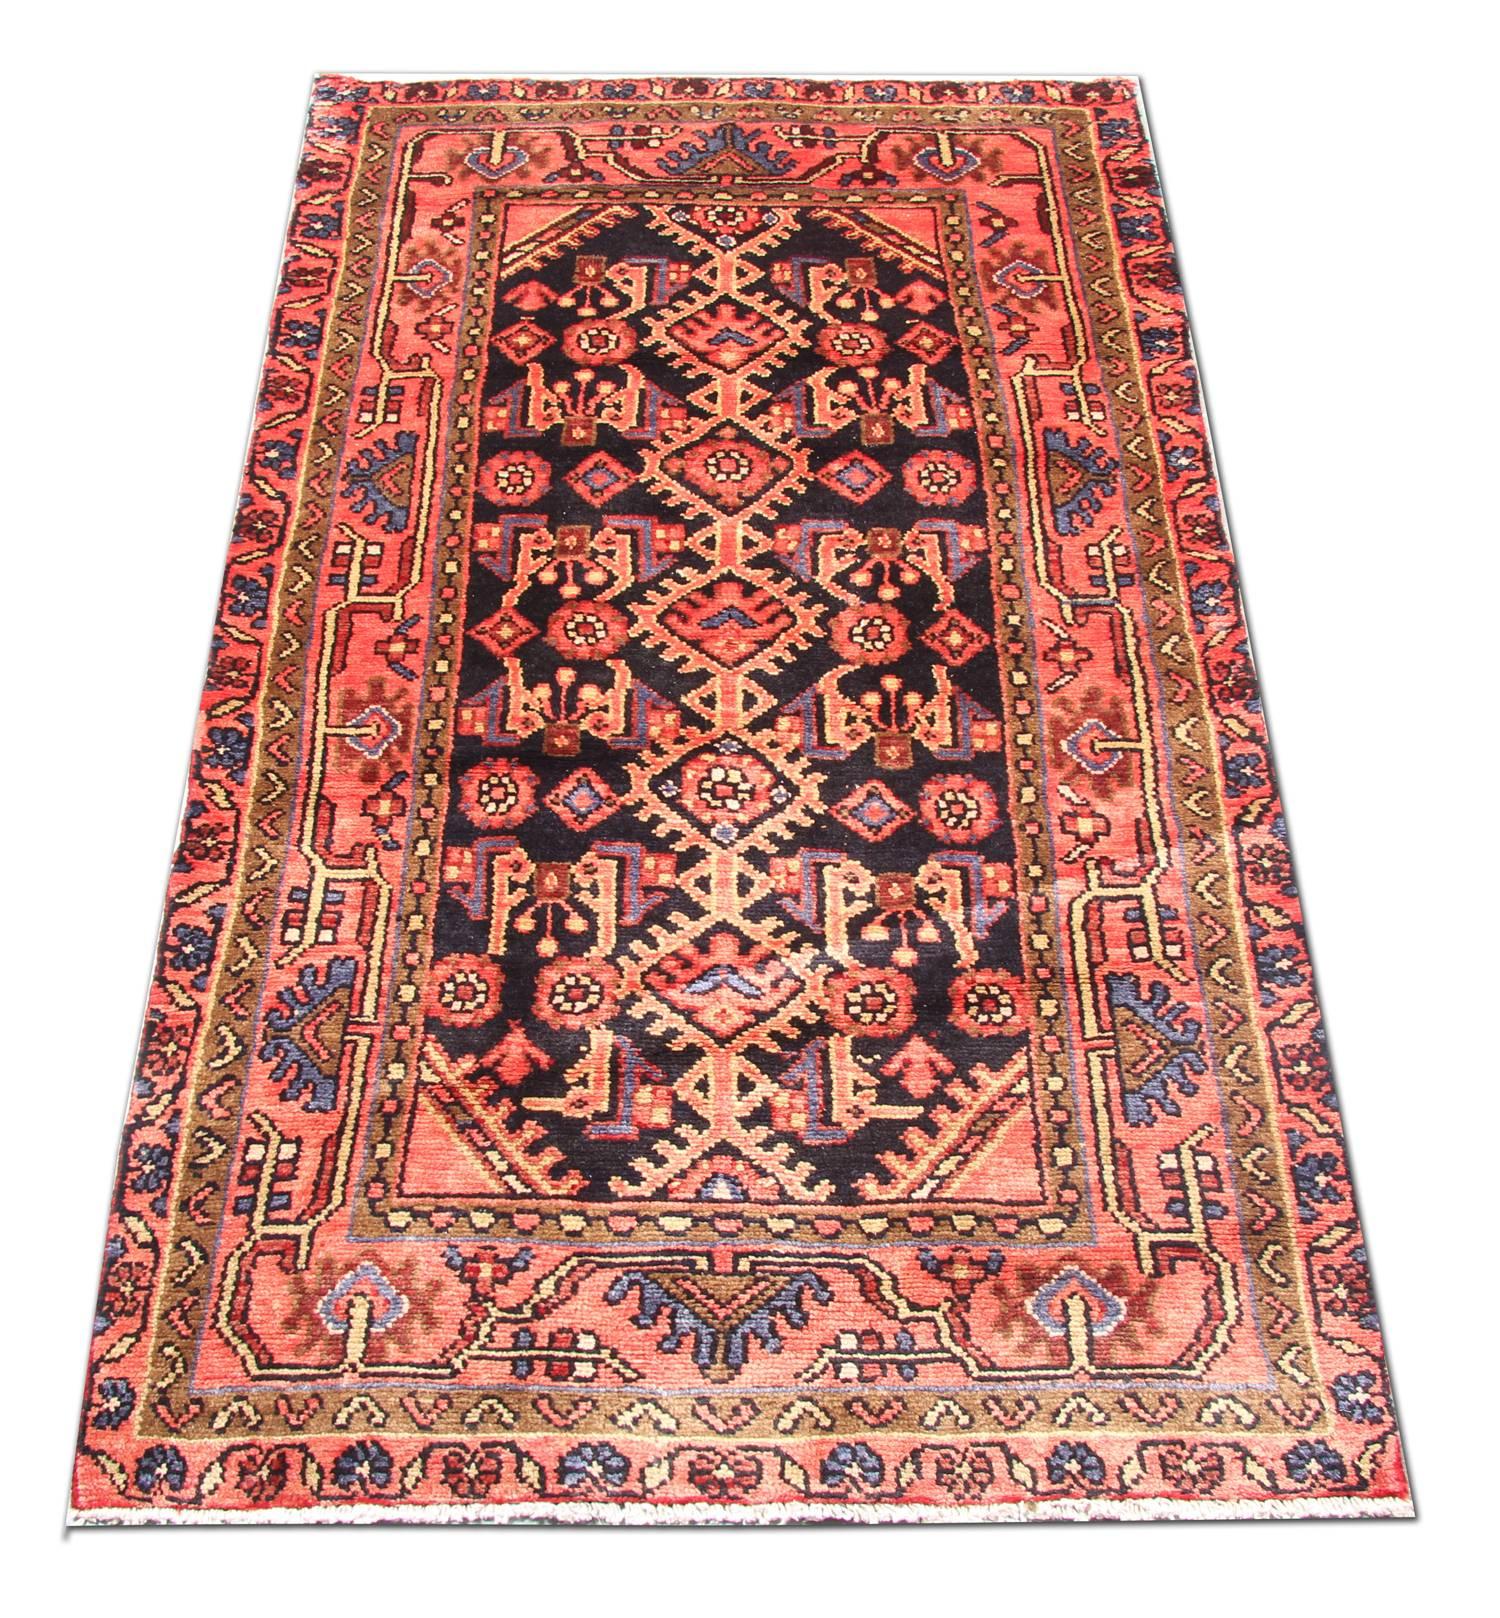 This elegant handmade wool rug was woven in Afghanistan in the mid 20th century with locally sourced materials. The central design features a fantastic tribal design woven on a deep blue background with red, cream and pink accents that make up the